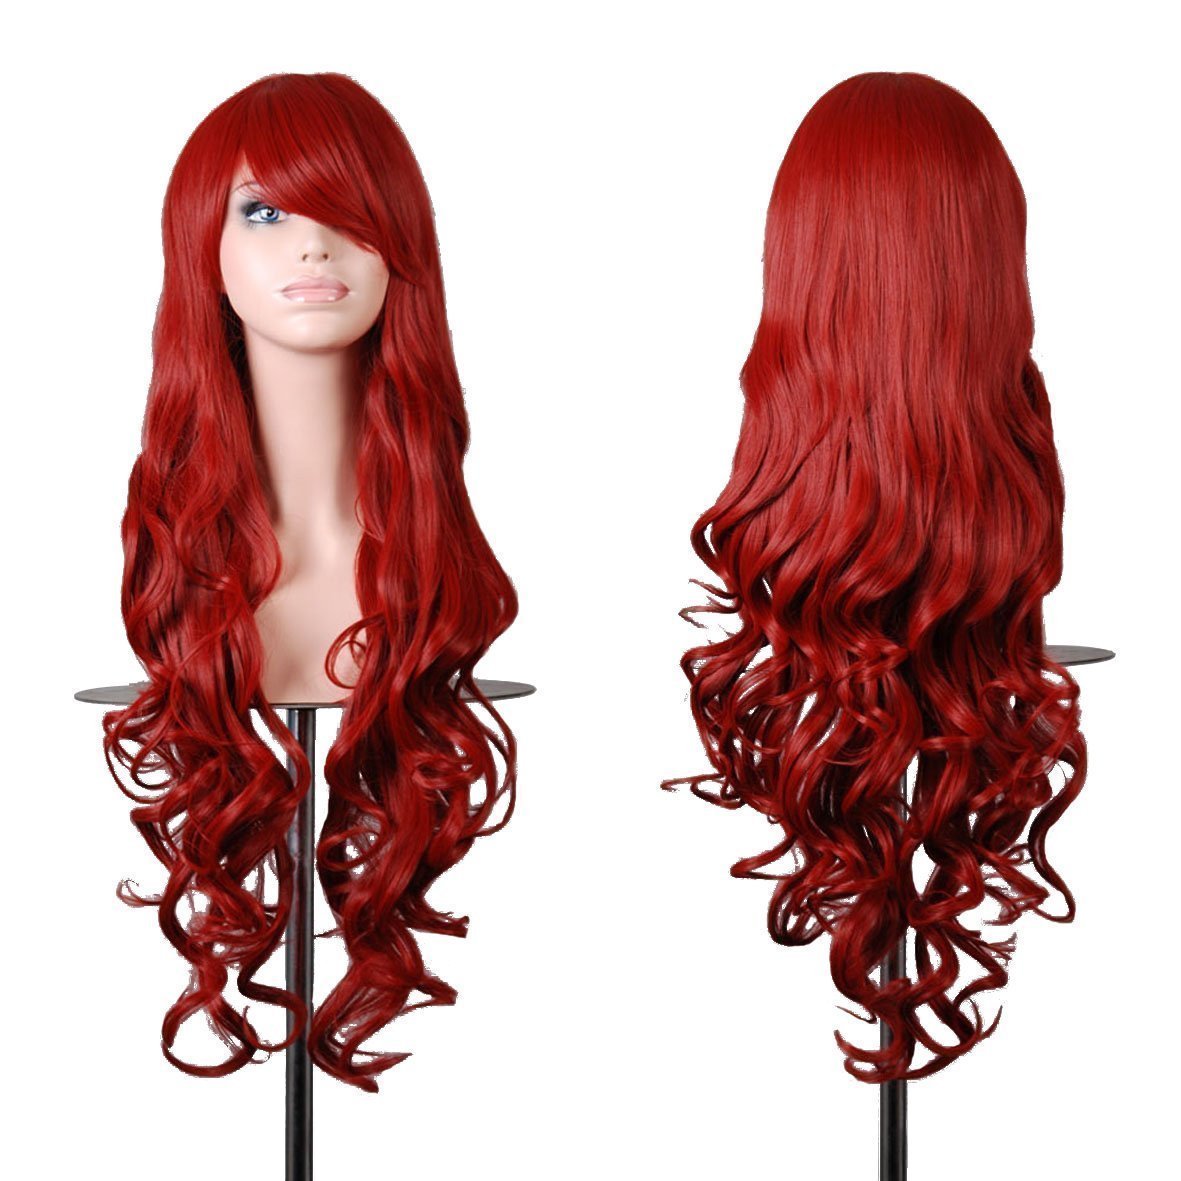 Top 10 Best Curly Wigs/ Wavy Wigs for Short & Long Hair